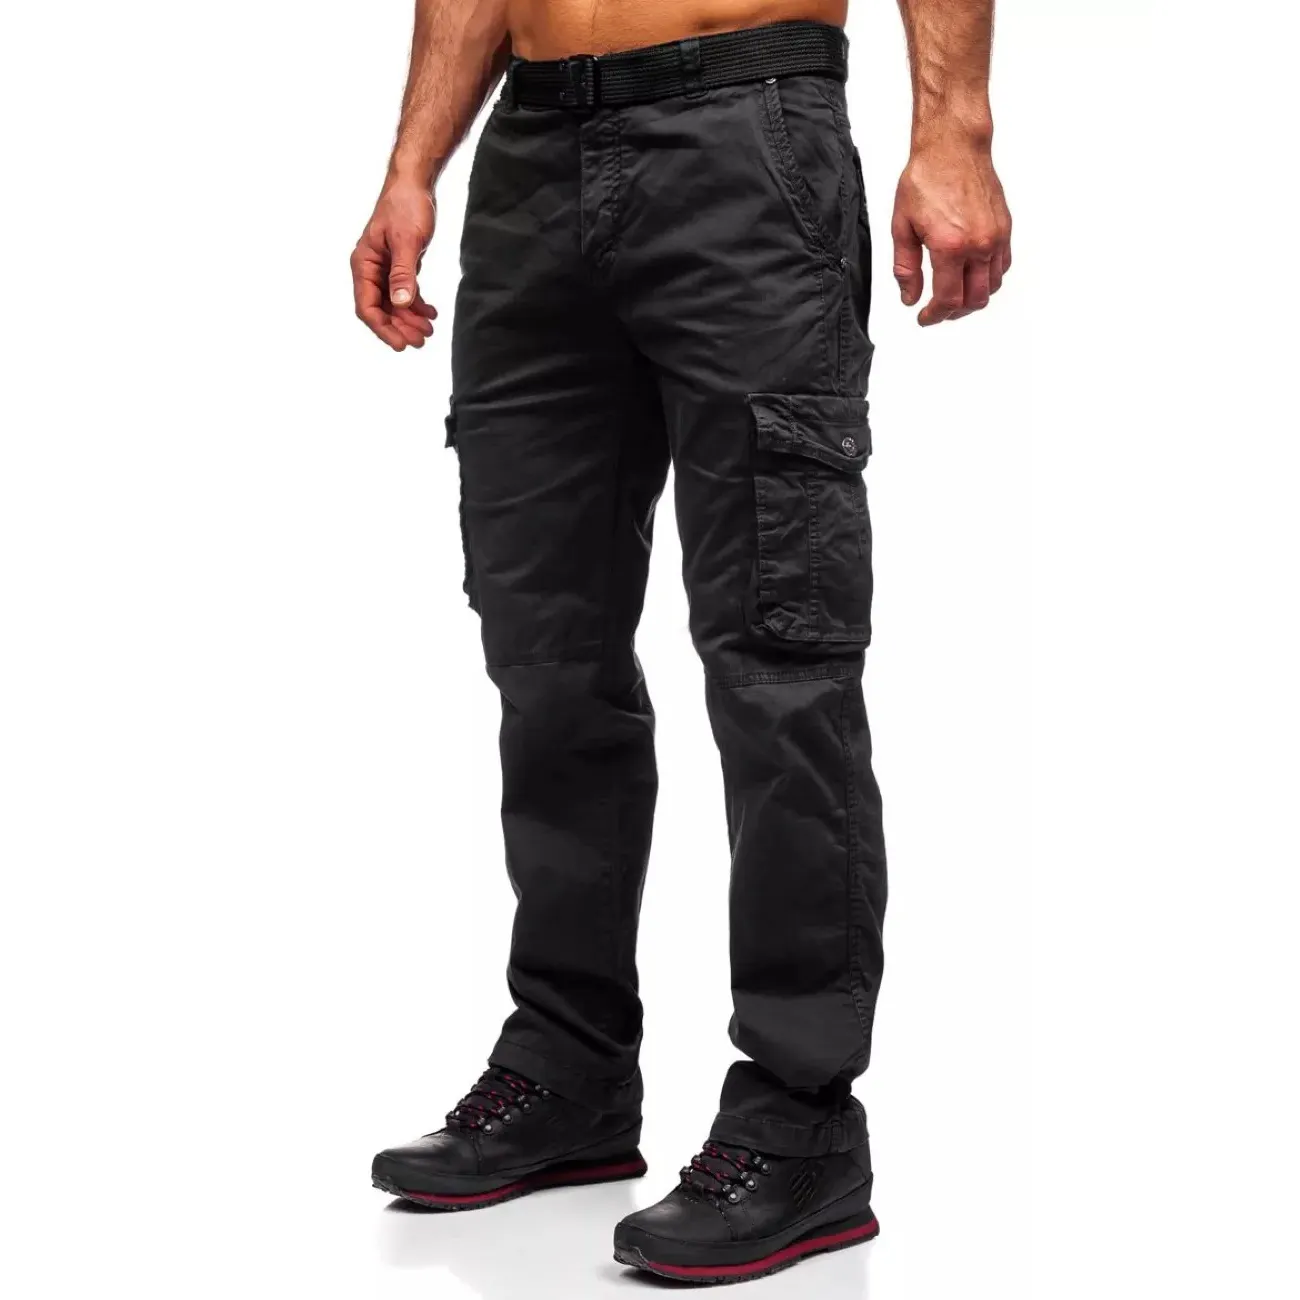 Outdoor Casual Pocket Pants Male Work men's Cargo Trousers Comfortable Trouser For Men